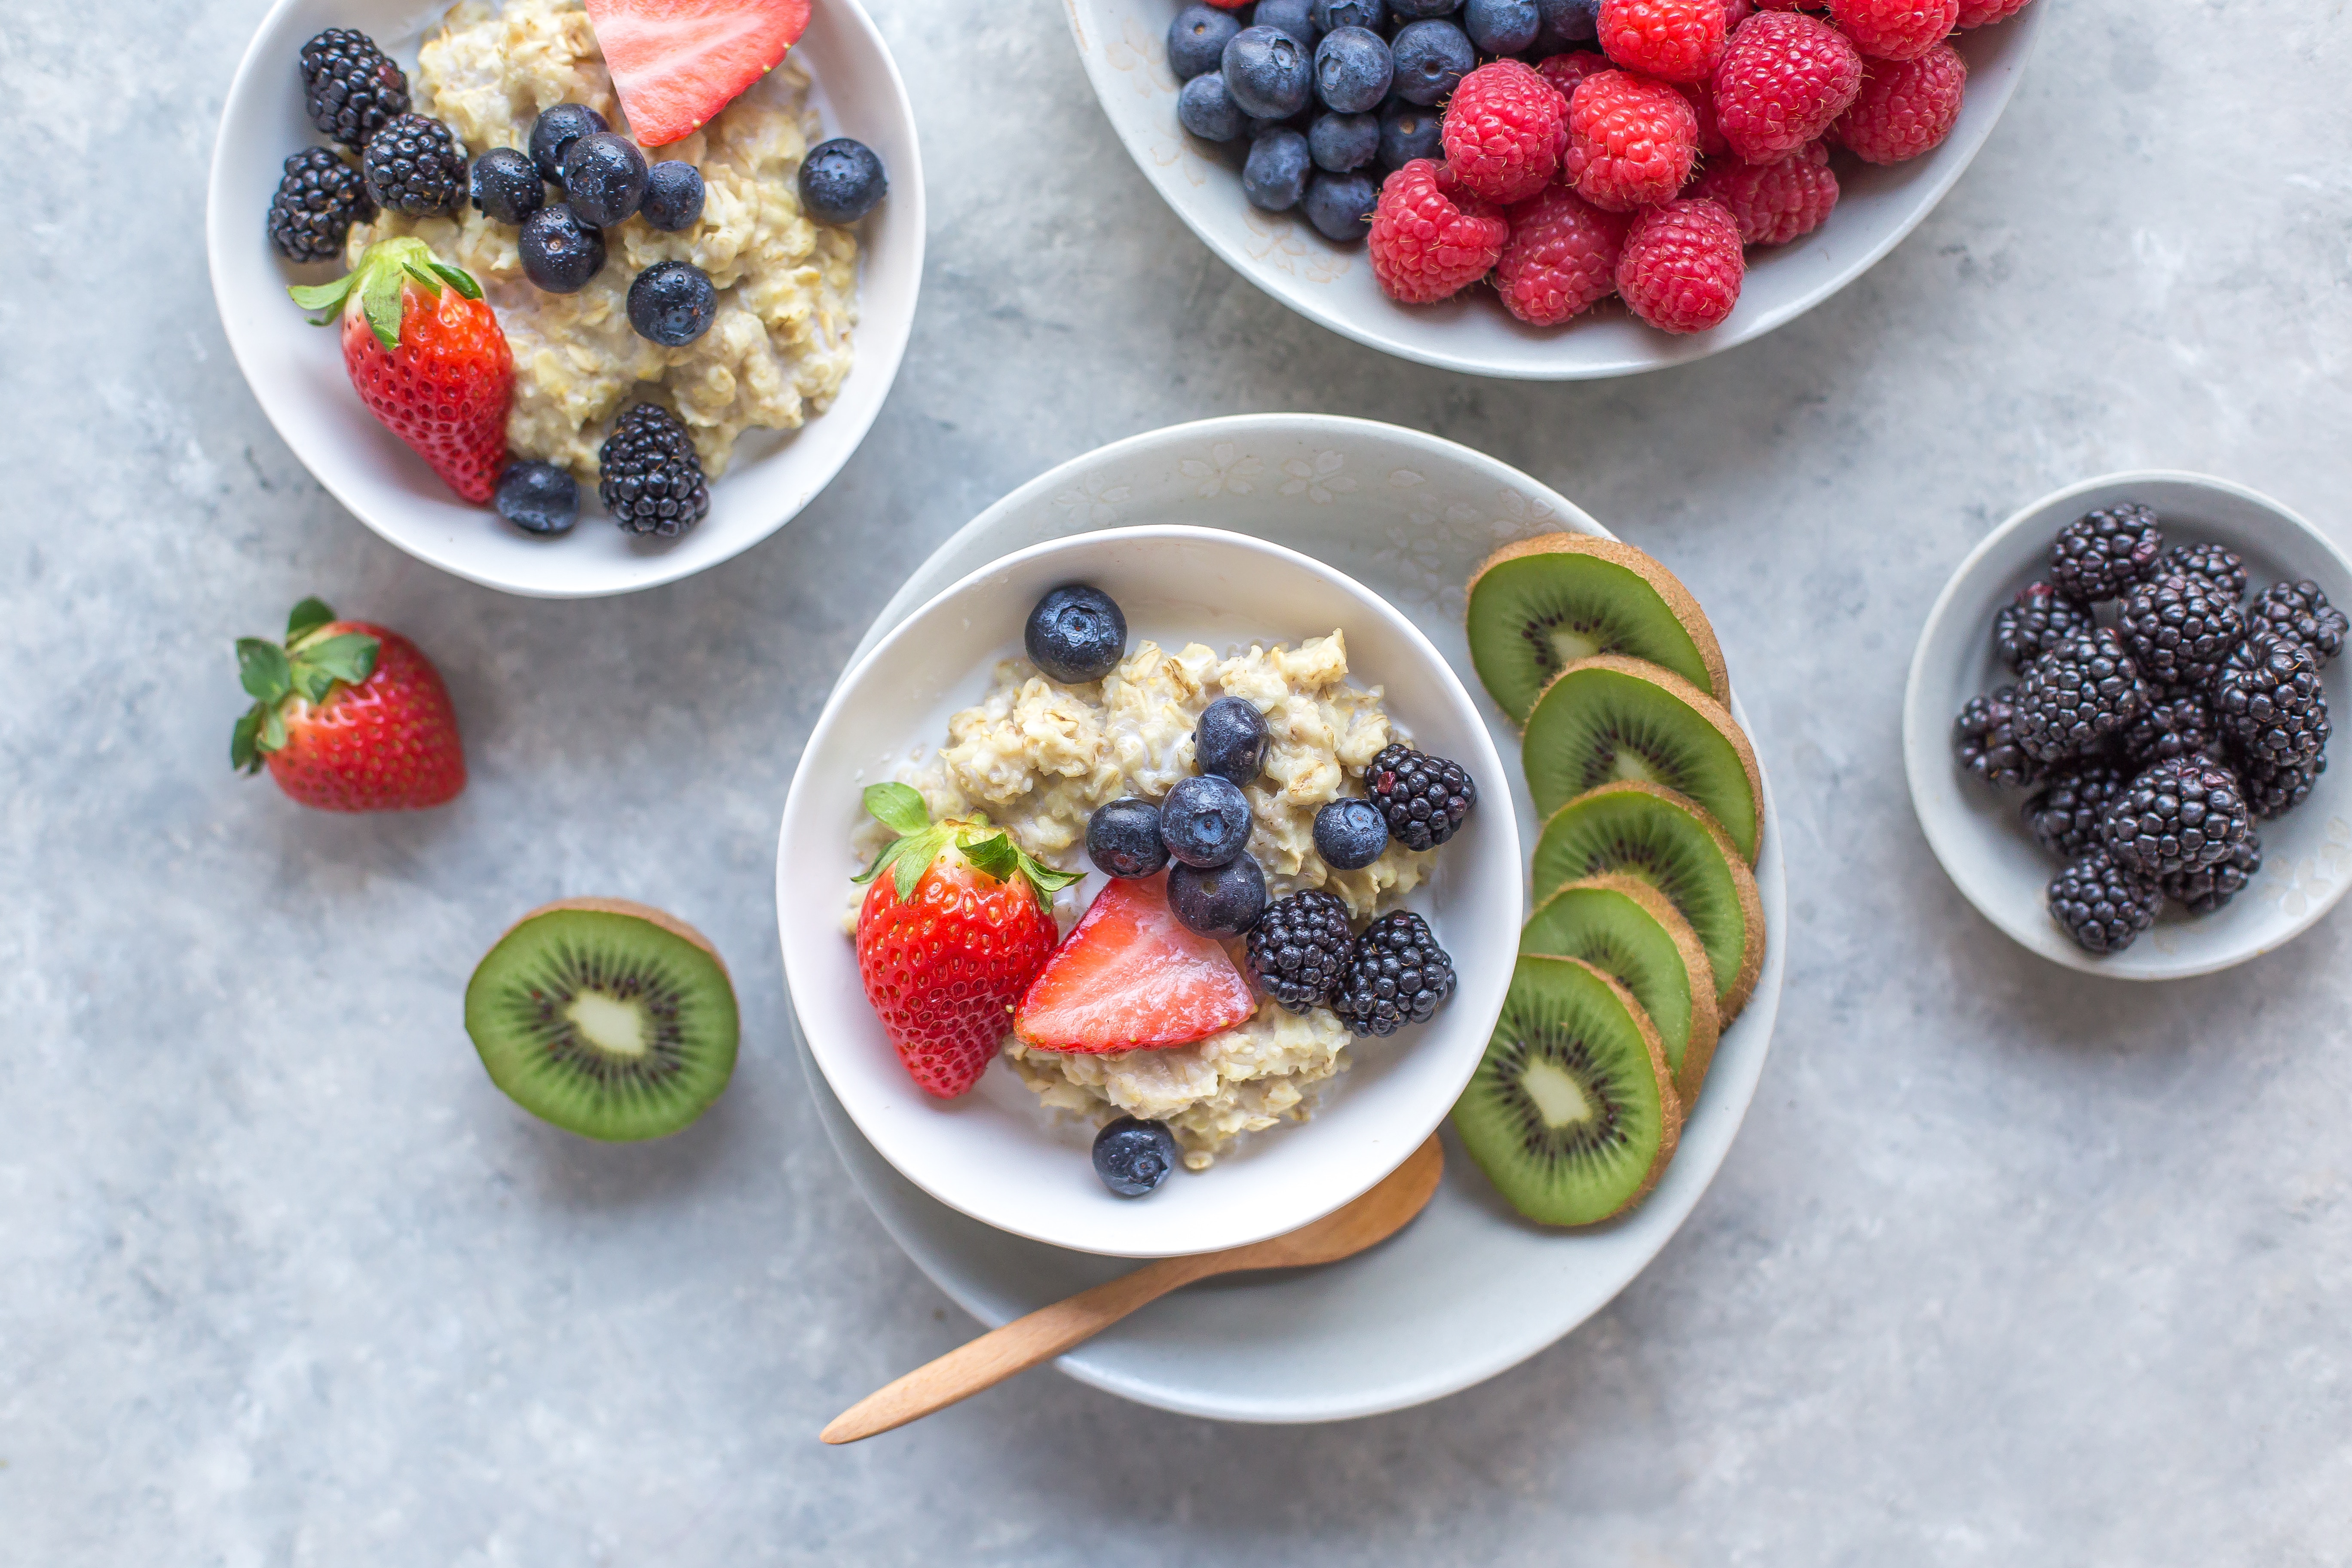 Fresh fruit and cereal